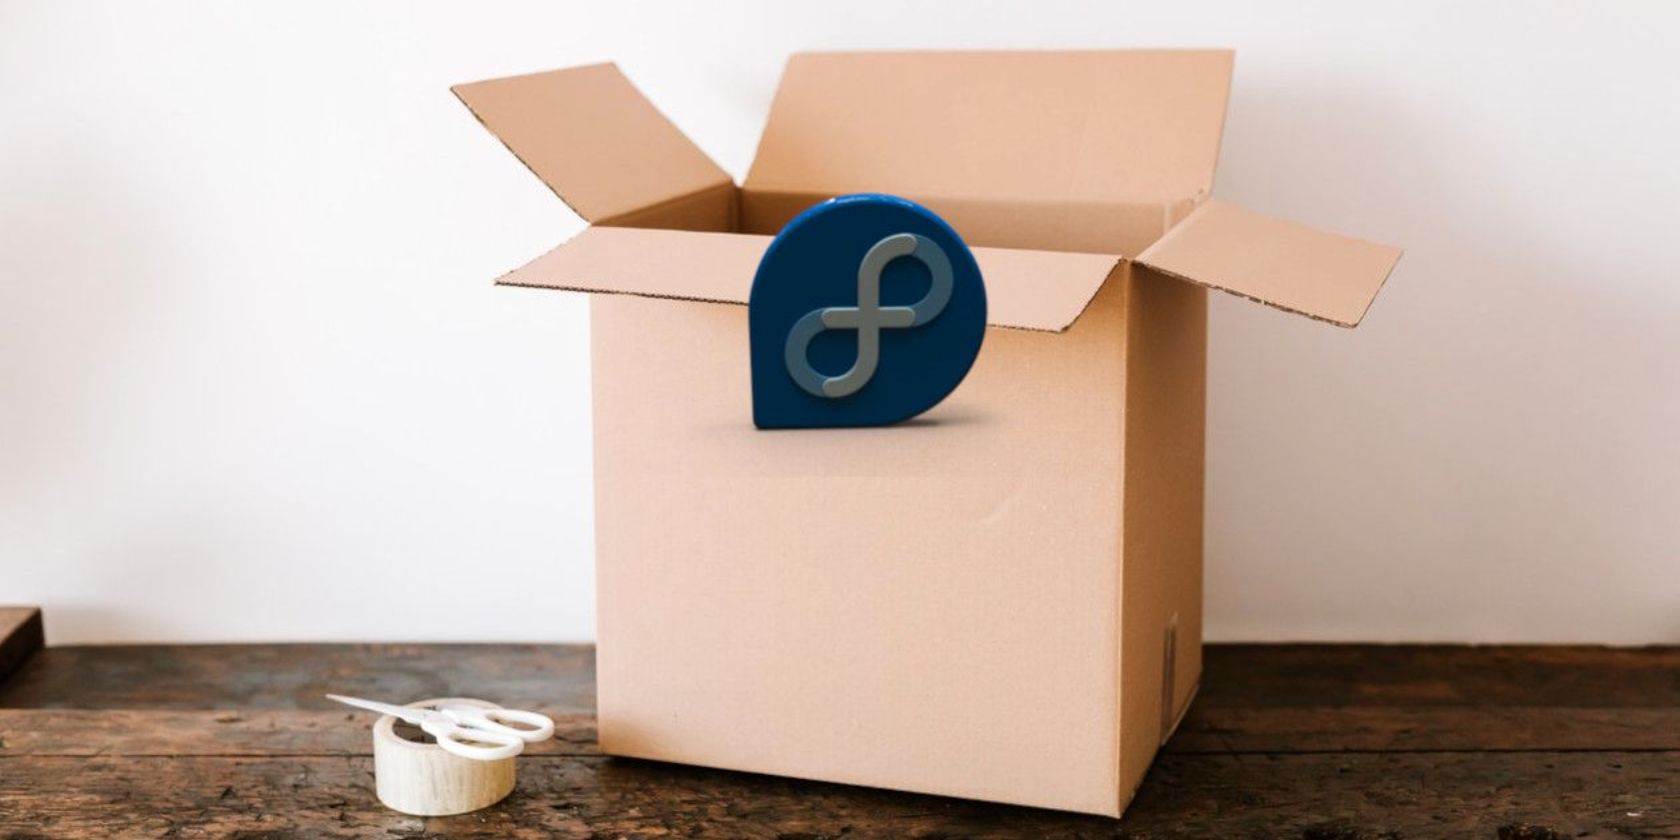 a package with fedora logo